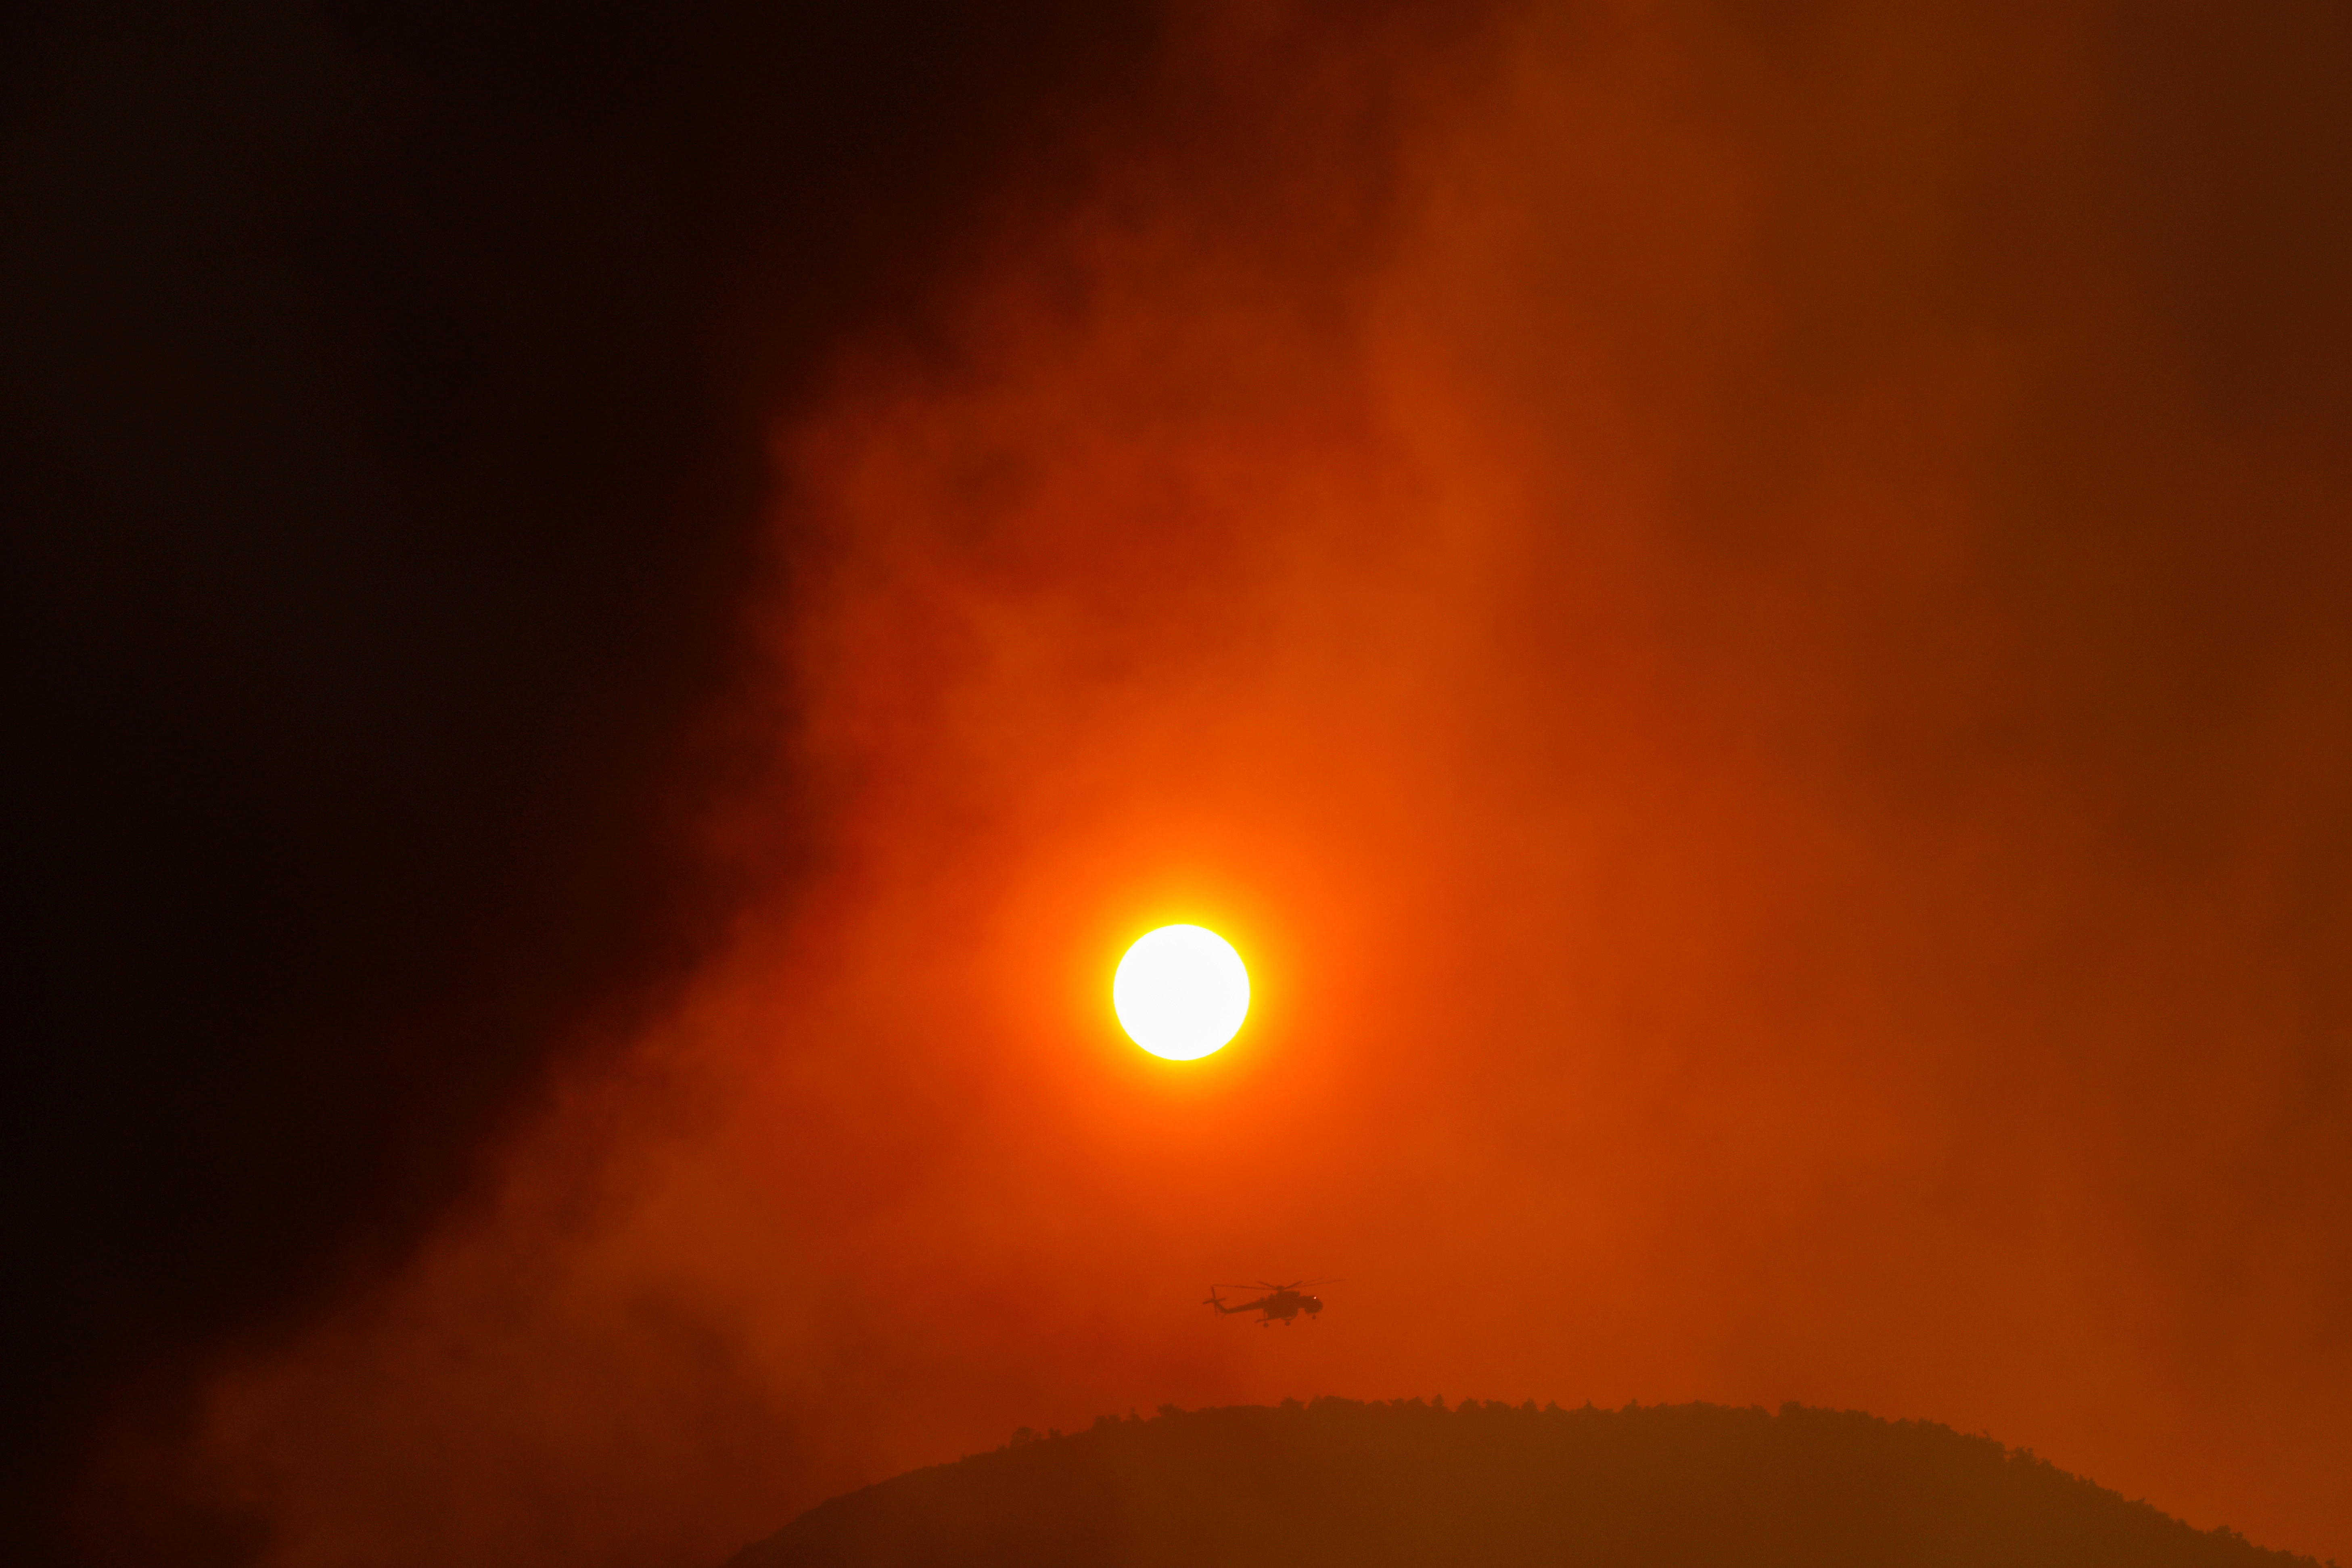 A firefighting helicopter flies by the sun as a wildfire burns in the village of Vilia, Greece, August 18, 2021. REUTERS/Alkis Konstantinidis